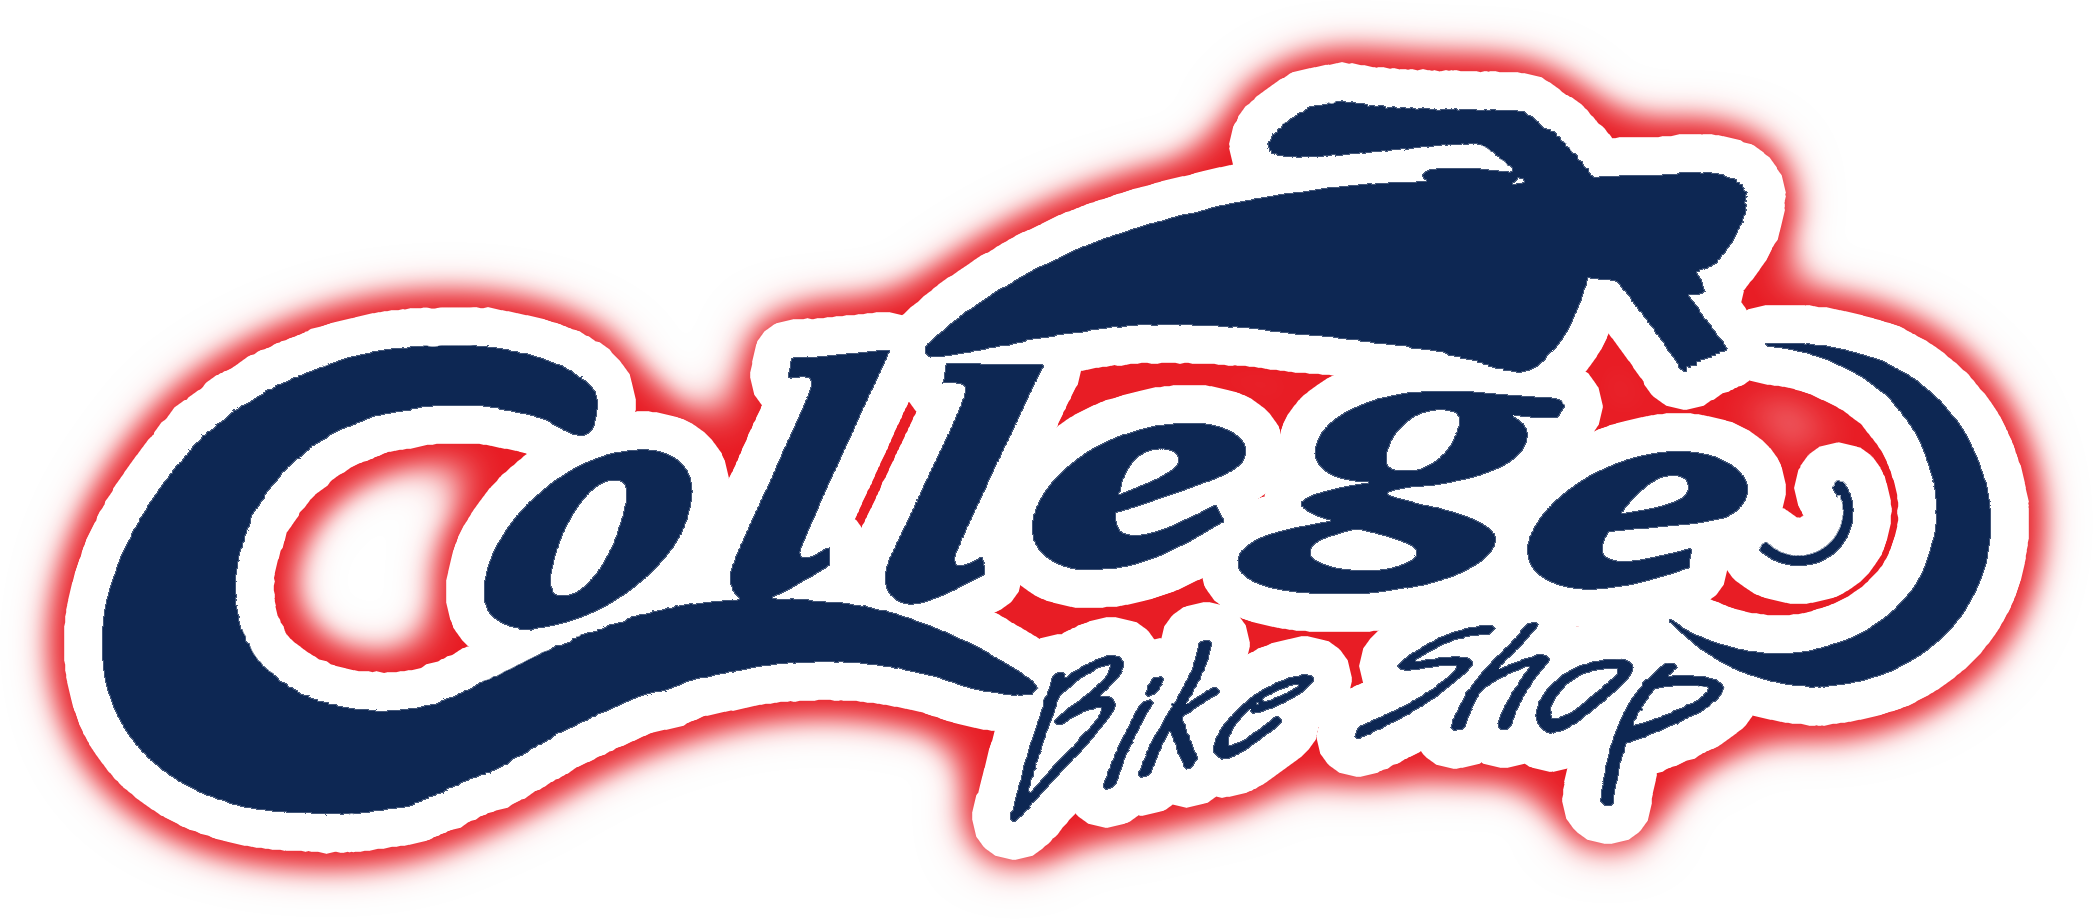 College Bike Shop proudly serves Lansing and our neighbors in Grand Rapids, Flint, Ann Arbor, Jackson, Battle Creek, and Kalamazoo